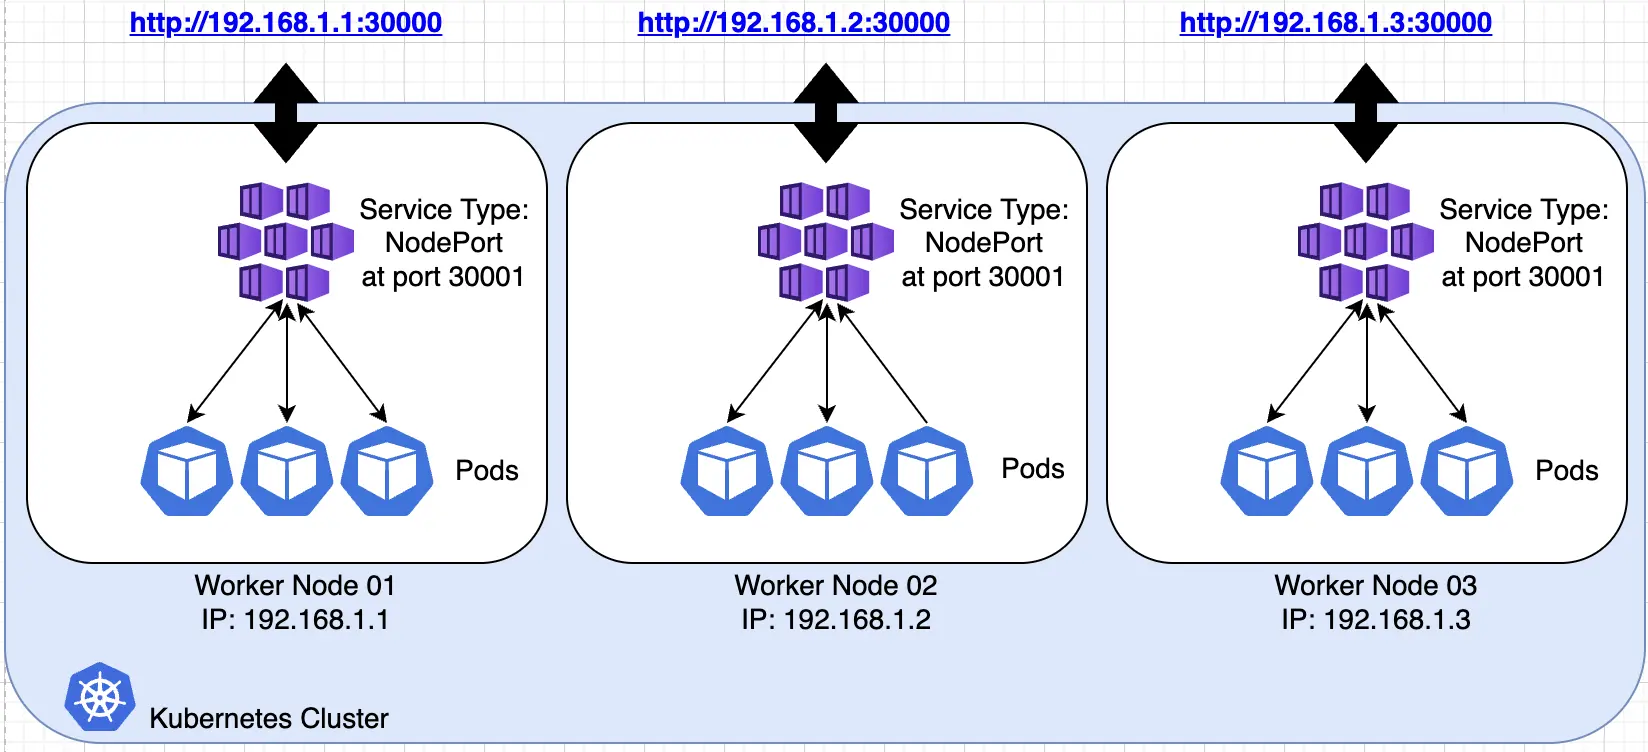 A diagram of a Kubernetes Cluster. Within are 3 boxes, labeled as worker nodes, with the IP addresses: 192.168.1.1, 192.168.1.2, and 192.168.1.3. Each box contains several purple boxes labeled “Service Type: NodePort at port 30001”. They point to three blue boxes labeled “Pods”. Each worker node box points to a URL corresponding to its IP address: “http://192.168.1.1:30000” and so forth, with port 30000 for each.